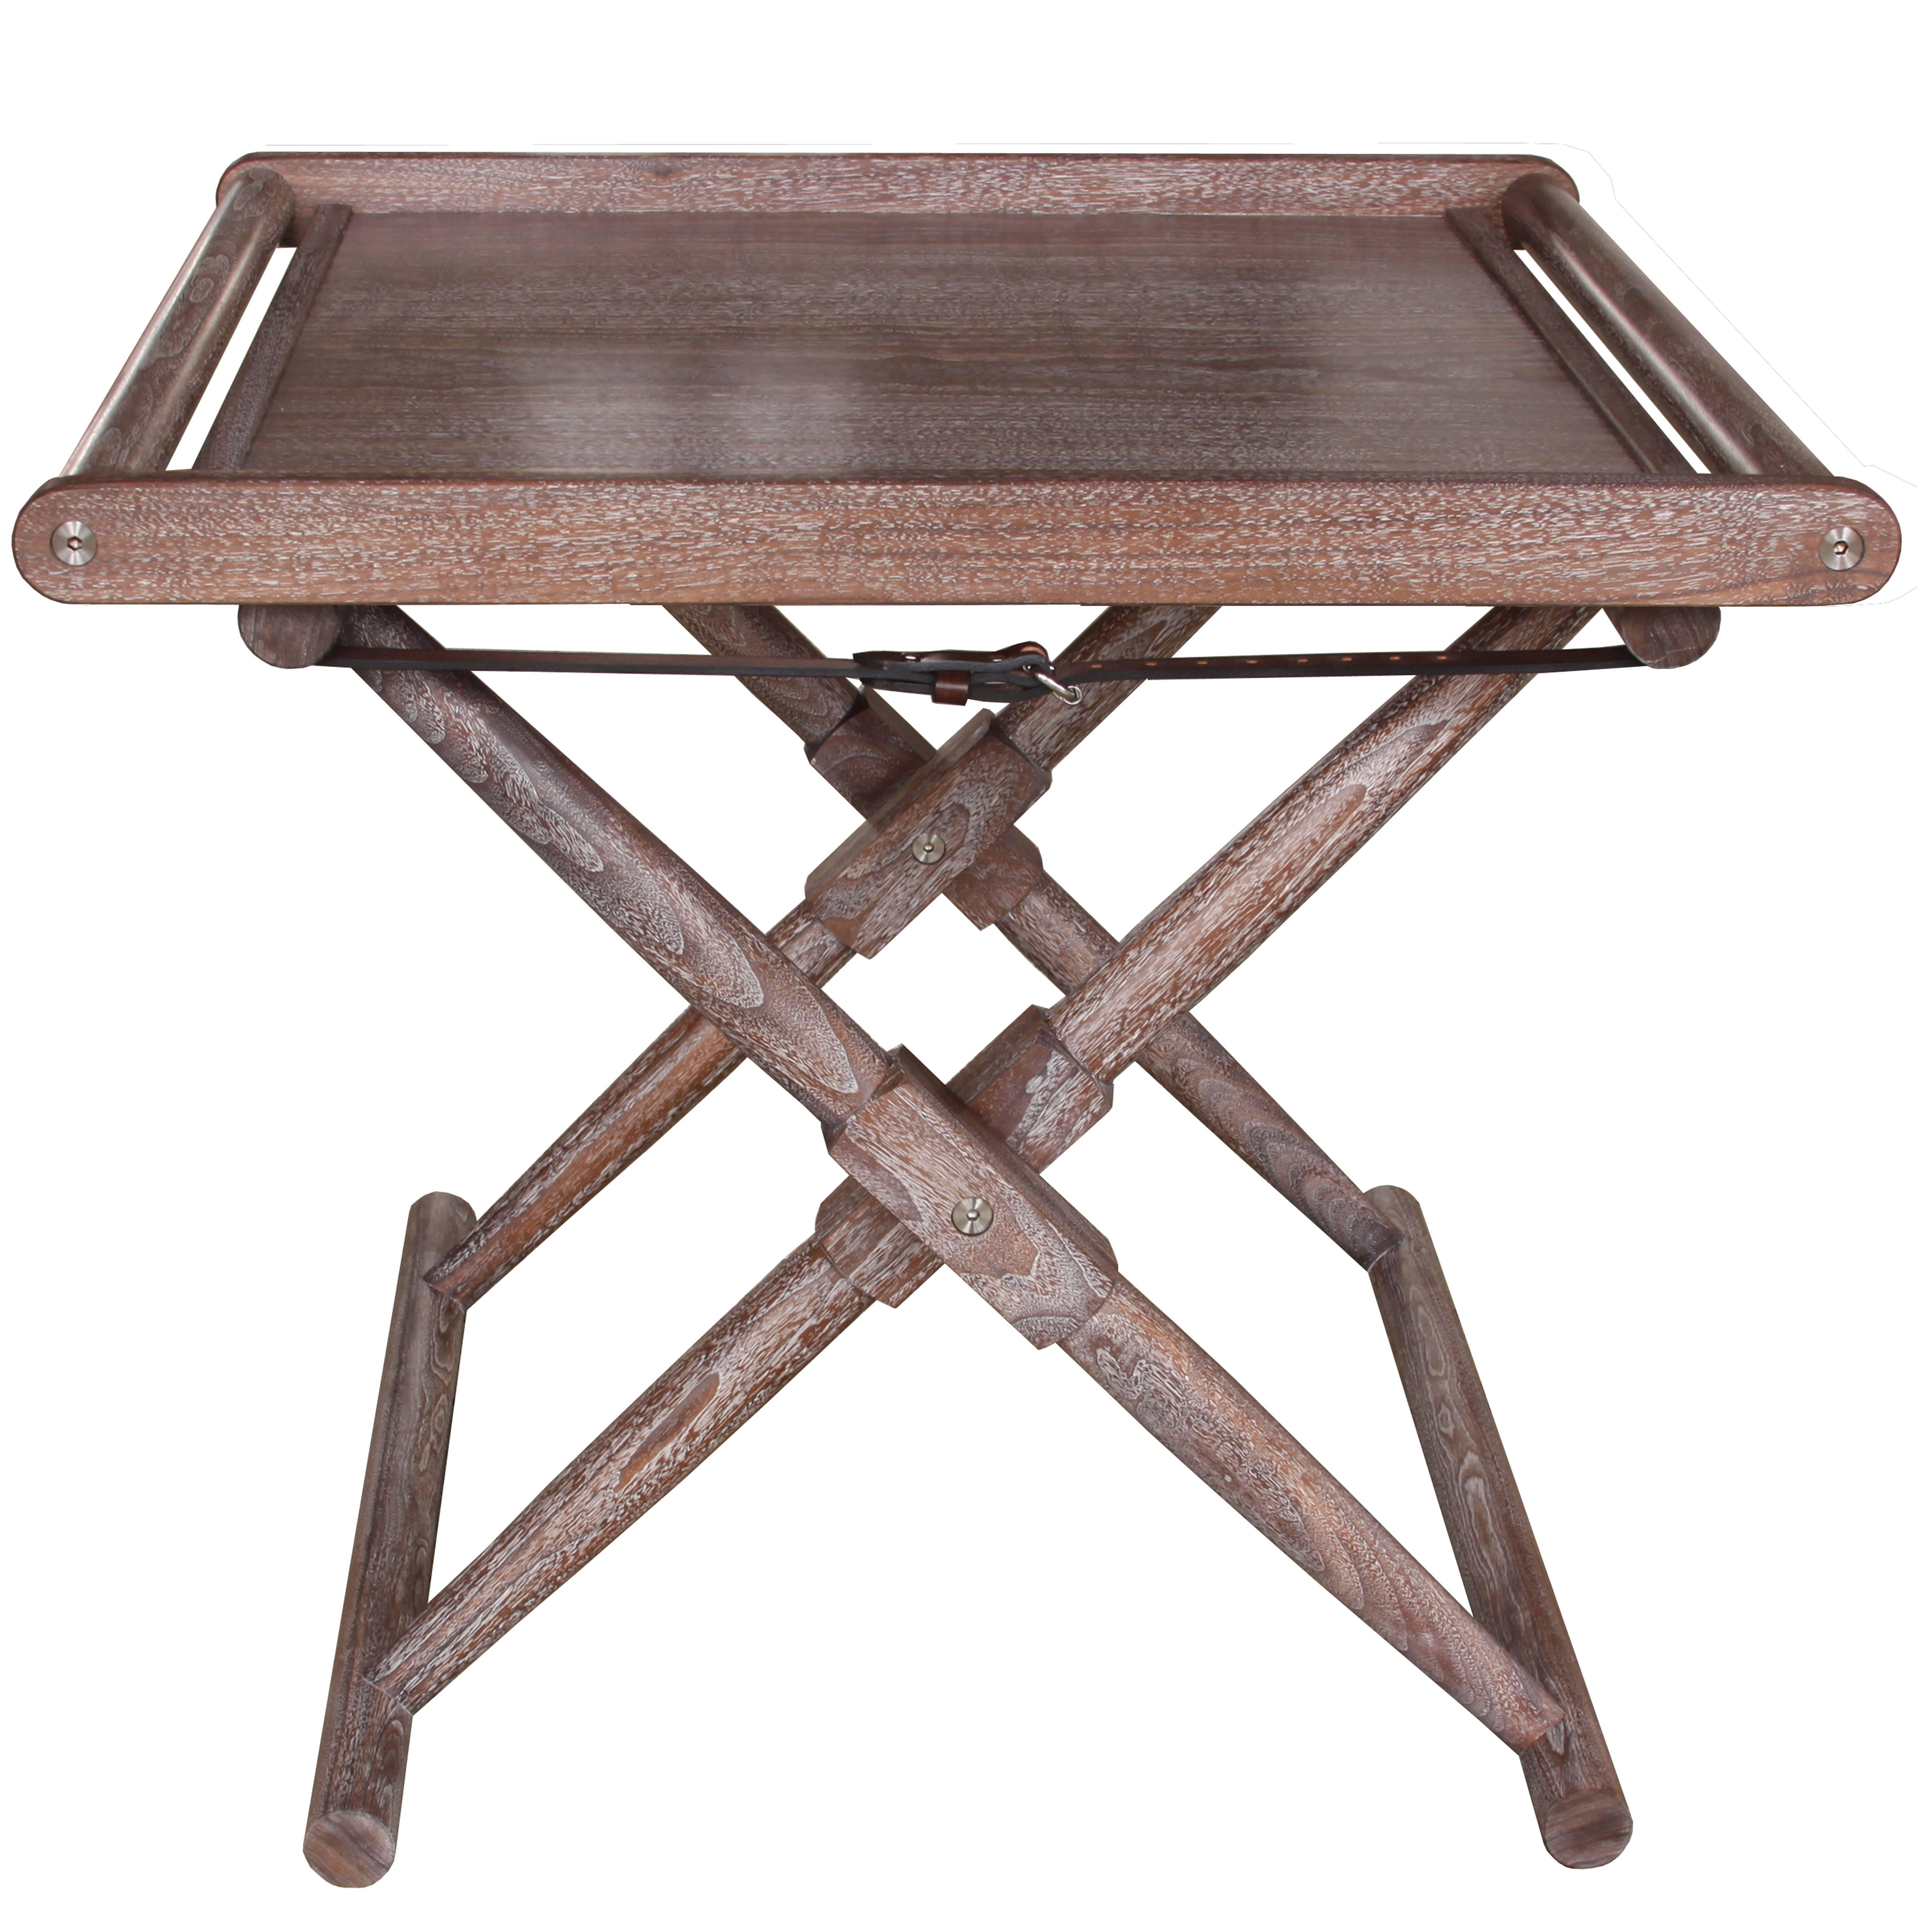 Matthiessen Tray Table in Limed Walnut - handcrafted by Richard Wrightman Design